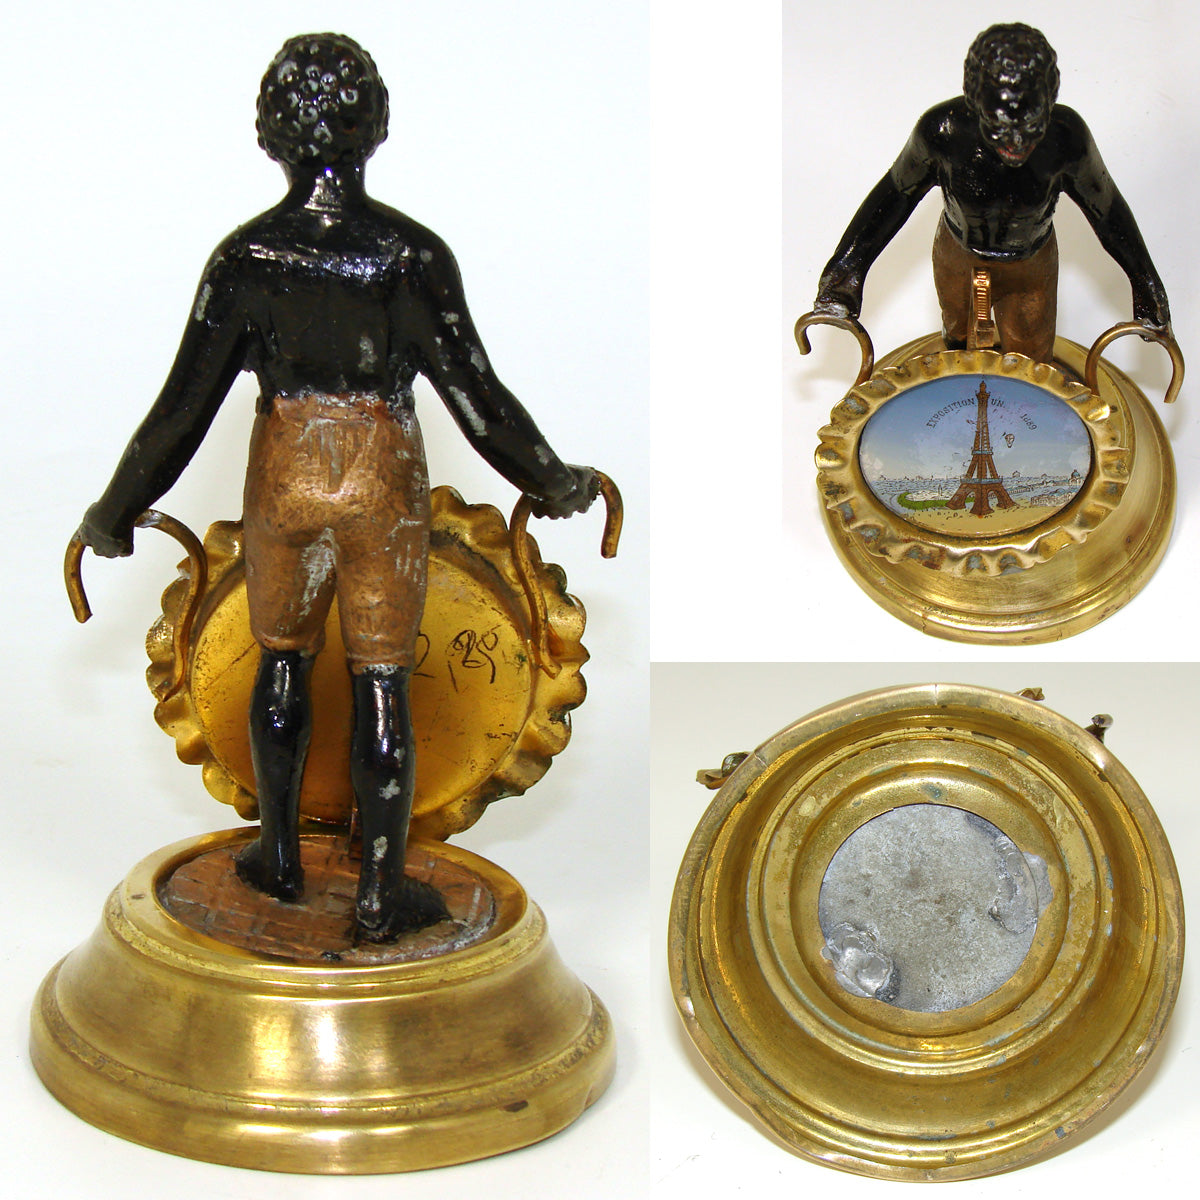 Rare Antique French 1889 World Expo Eiffel Tower Souvenir Pocket Watch Stand, a Blackamoor Figure